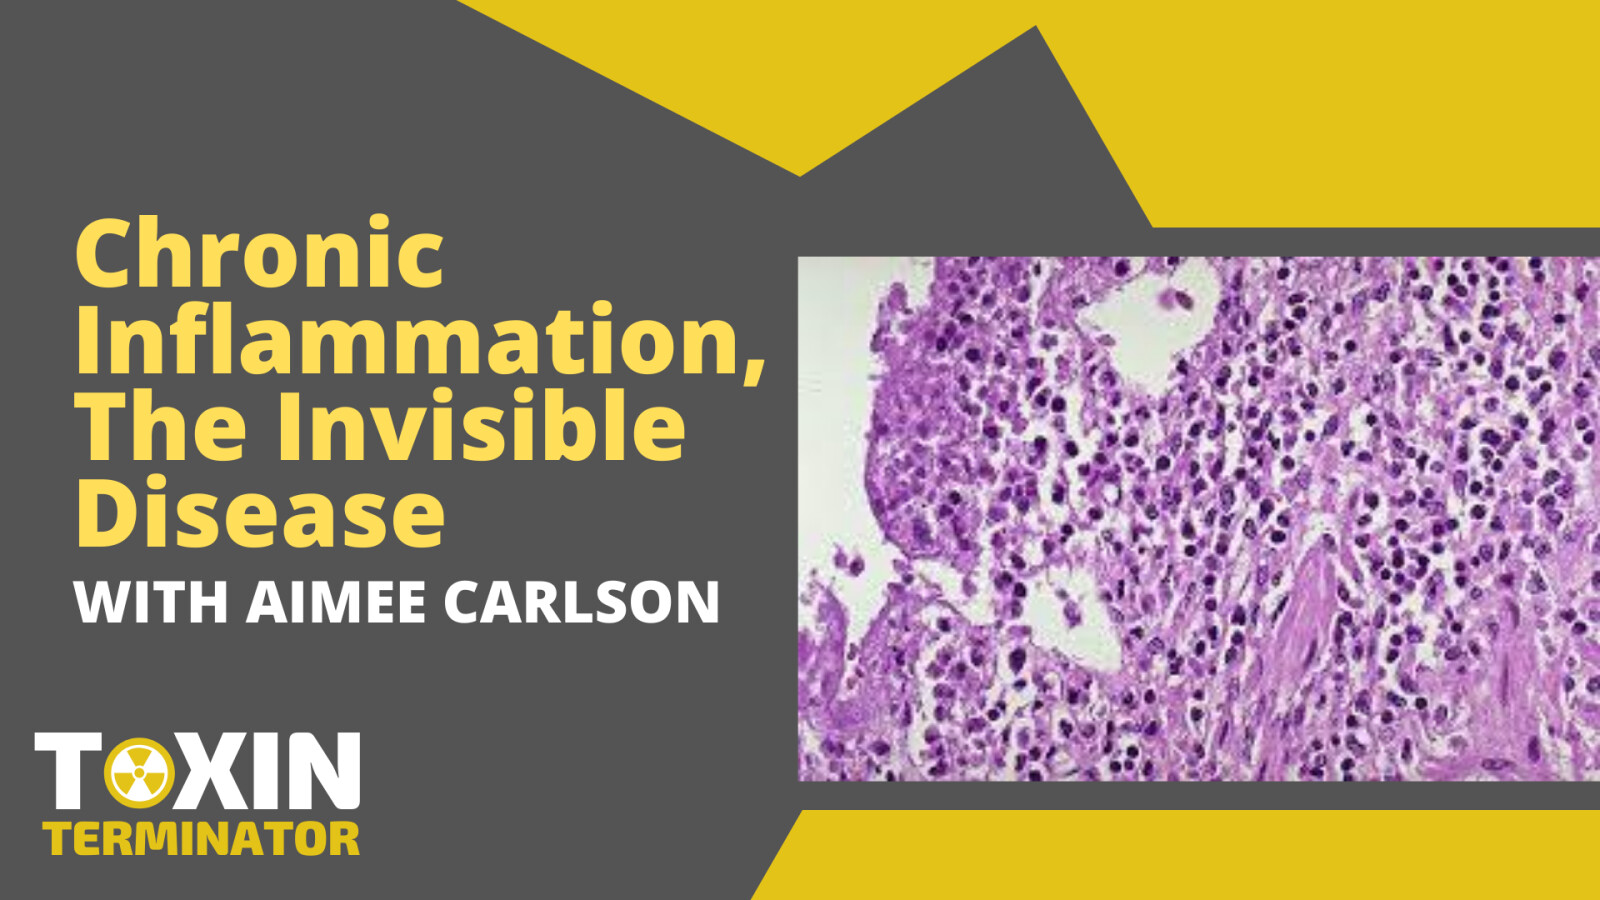 Chronic Inflammation, The Invisible Disease